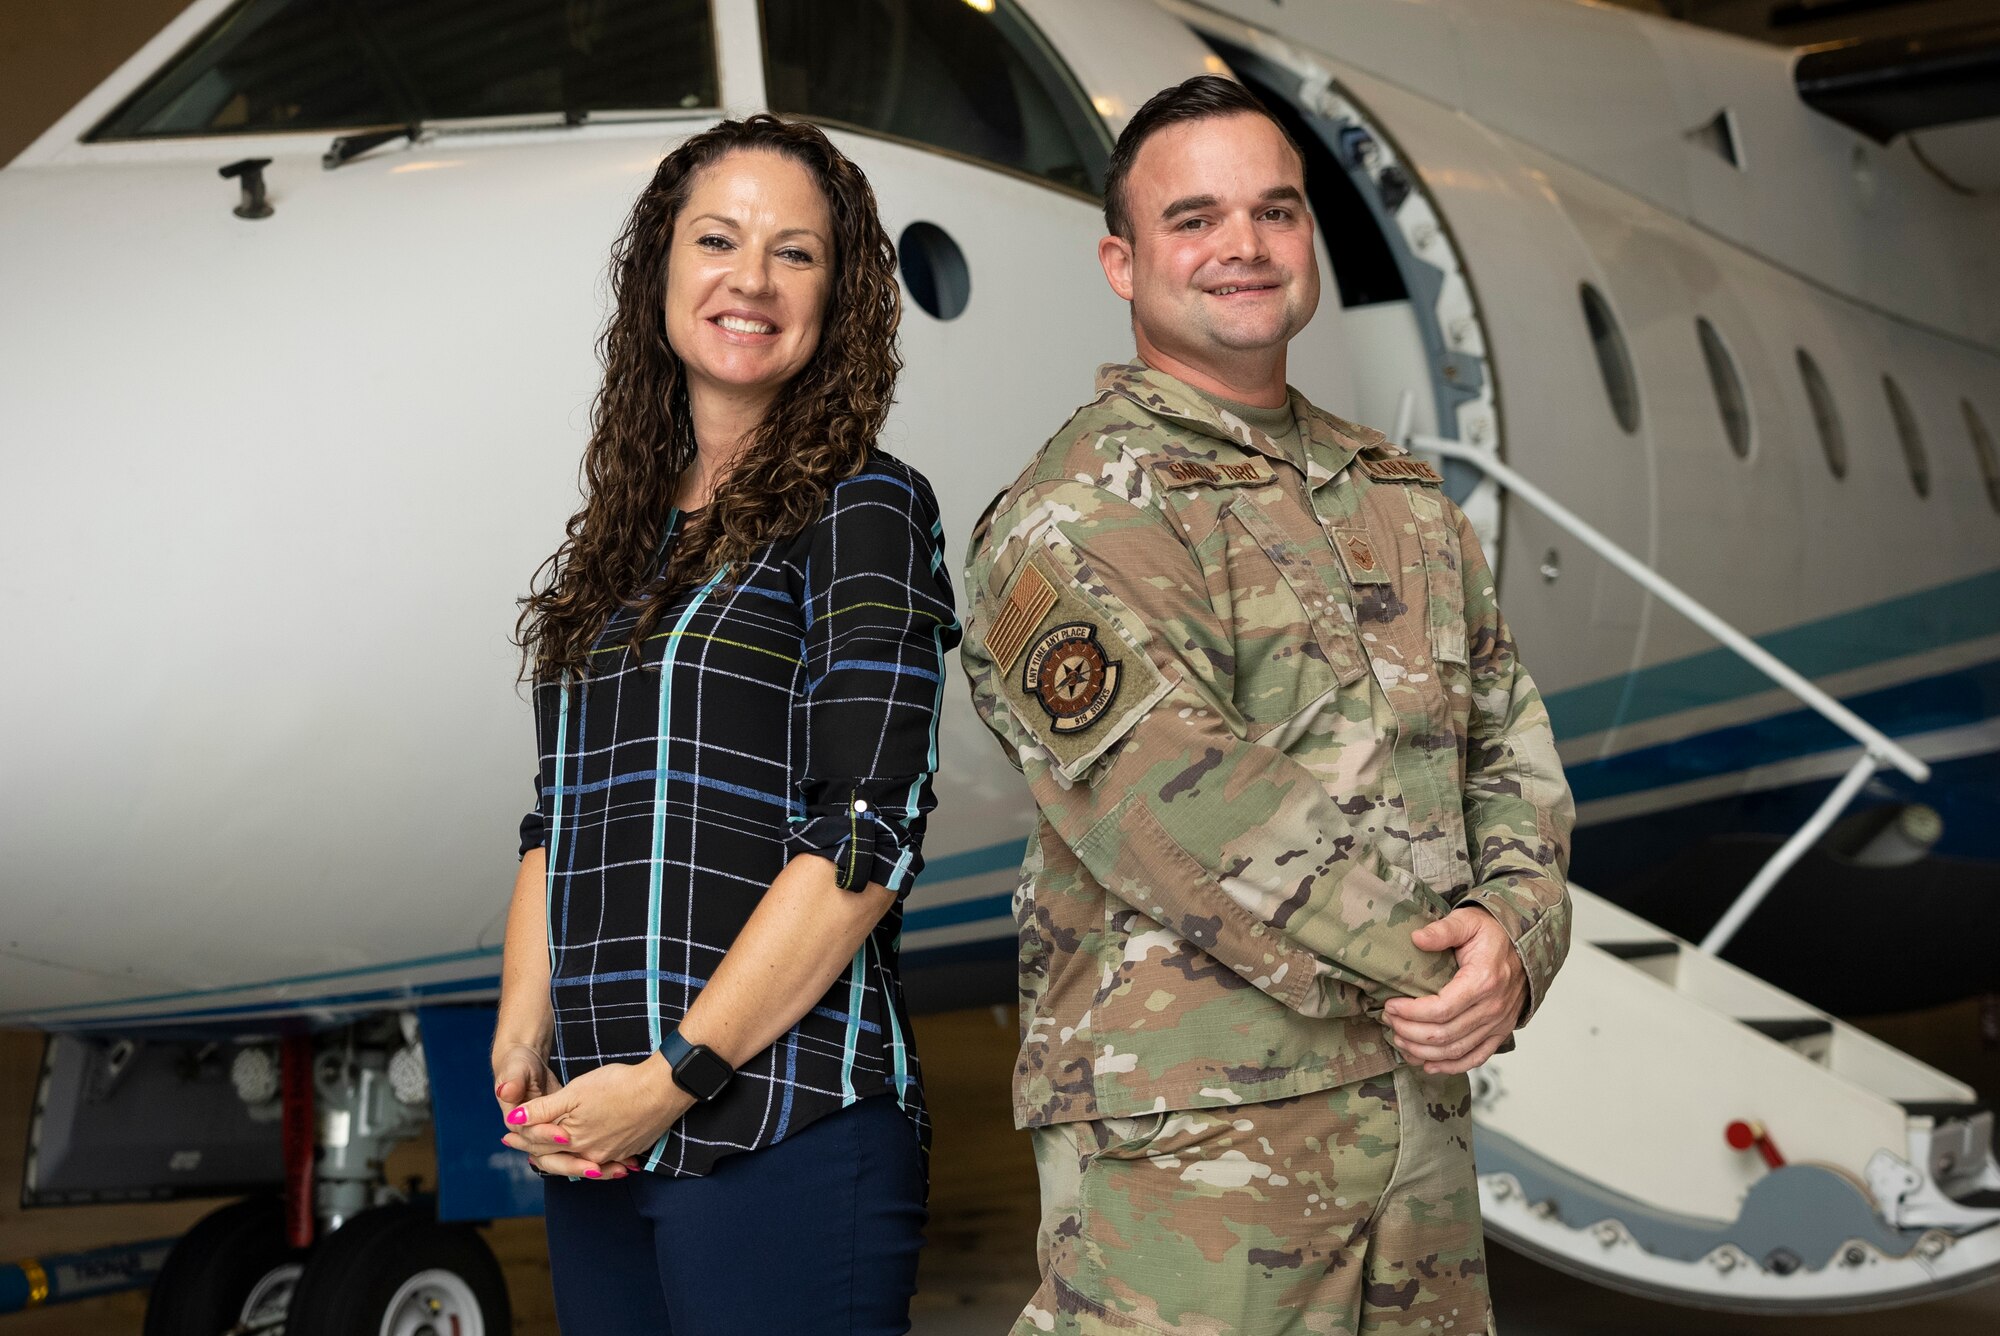 Civilian and Airman stand back-to-back in front of aircraft.